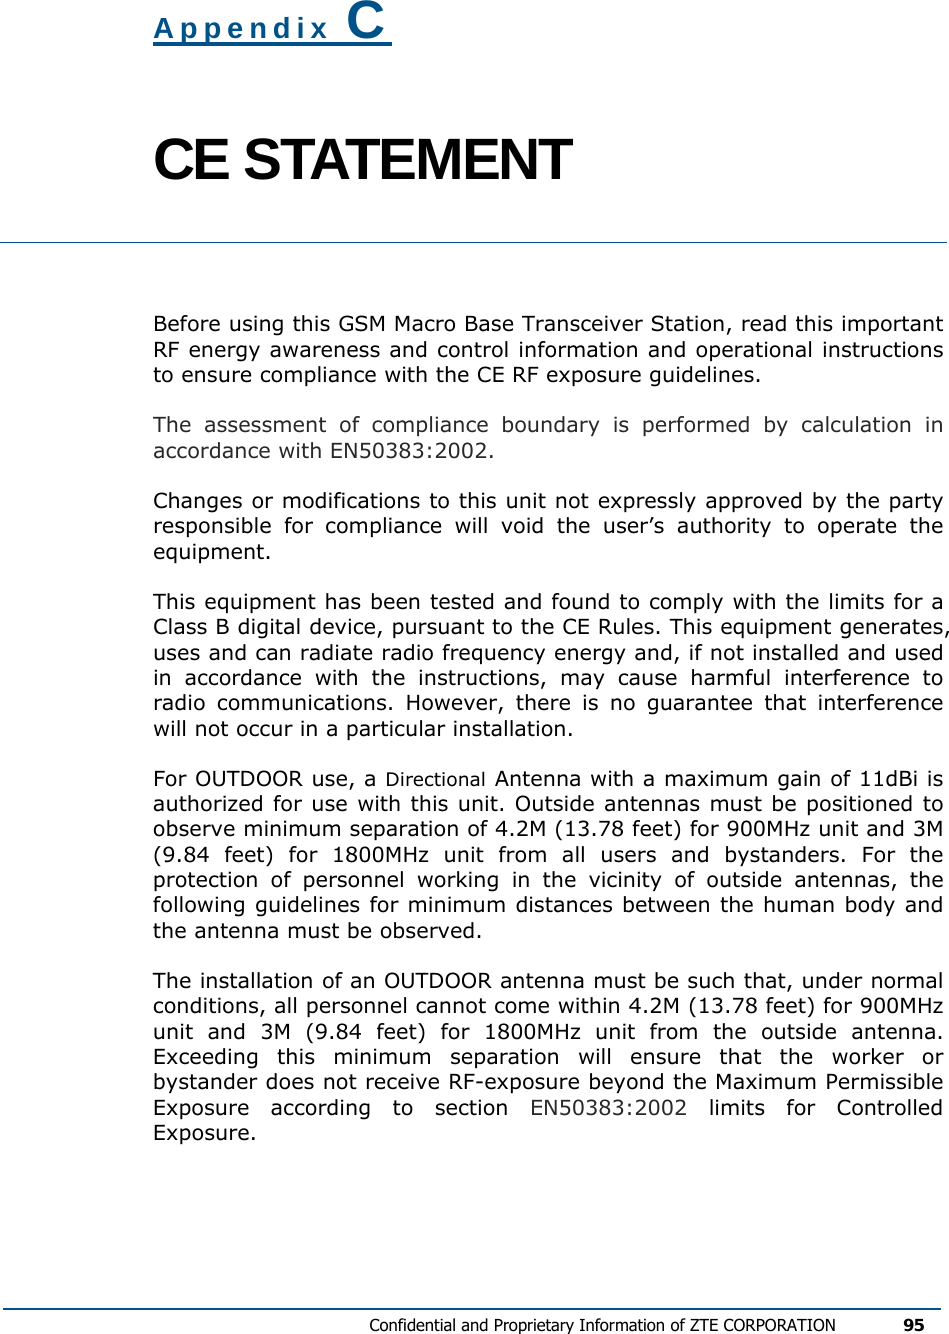  Confidential and Proprietary Information of ZTE CORPORATION 95  Appendix C CE STATEMENT  Before using this GSM Macro Base Transceiver Station, read this important RF energy awareness and control information and operational instructions to ensure compliance with the CE RF exposure guidelines. The assessment of compliance boundary is performed by calculation in accordance with EN50383:2002. Changes or modifications to this unit not expressly approved by the party responsible for compliance will void the user’s authority to operate the equipment. This equipment has been tested and found to comply with the limits for a Class B digital device, pursuant to the CE Rules. This equipment generates, uses and can radiate radio frequency energy and, if not installed and used in accordance with the instructions, may cause harmful interference to radio communications. However, there is no guarantee that interference will not occur in a particular installation.  For OUTDOOR use, a Directional Antenna with a maximum gain of 11dBi is authorized for use with this unit. Outside antennas must be positioned to observe minimum separation of 4.2M (13.78 feet) for 900MHz unit and 3M (9.84 feet) for 1800MHz unit from all users and bystanders. For the protection of personnel working in the vicinity of outside antennas, the following guidelines for minimum distances between the human body and the antenna must be observed. The installation of an OUTDOOR antenna must be such that, under normal conditions, all personnel cannot come within 4.2M (13.78 feet) for 900MHz unit and 3M (9.84 feet) for 1800MHz unit from the outside antenna. Exceeding this minimum separation will ensure that the worker or bystander does not receive RF-exposure beyond the Maximum Permissible Exposure according to section EN50383:2002 limits for Controlled Exposure. 